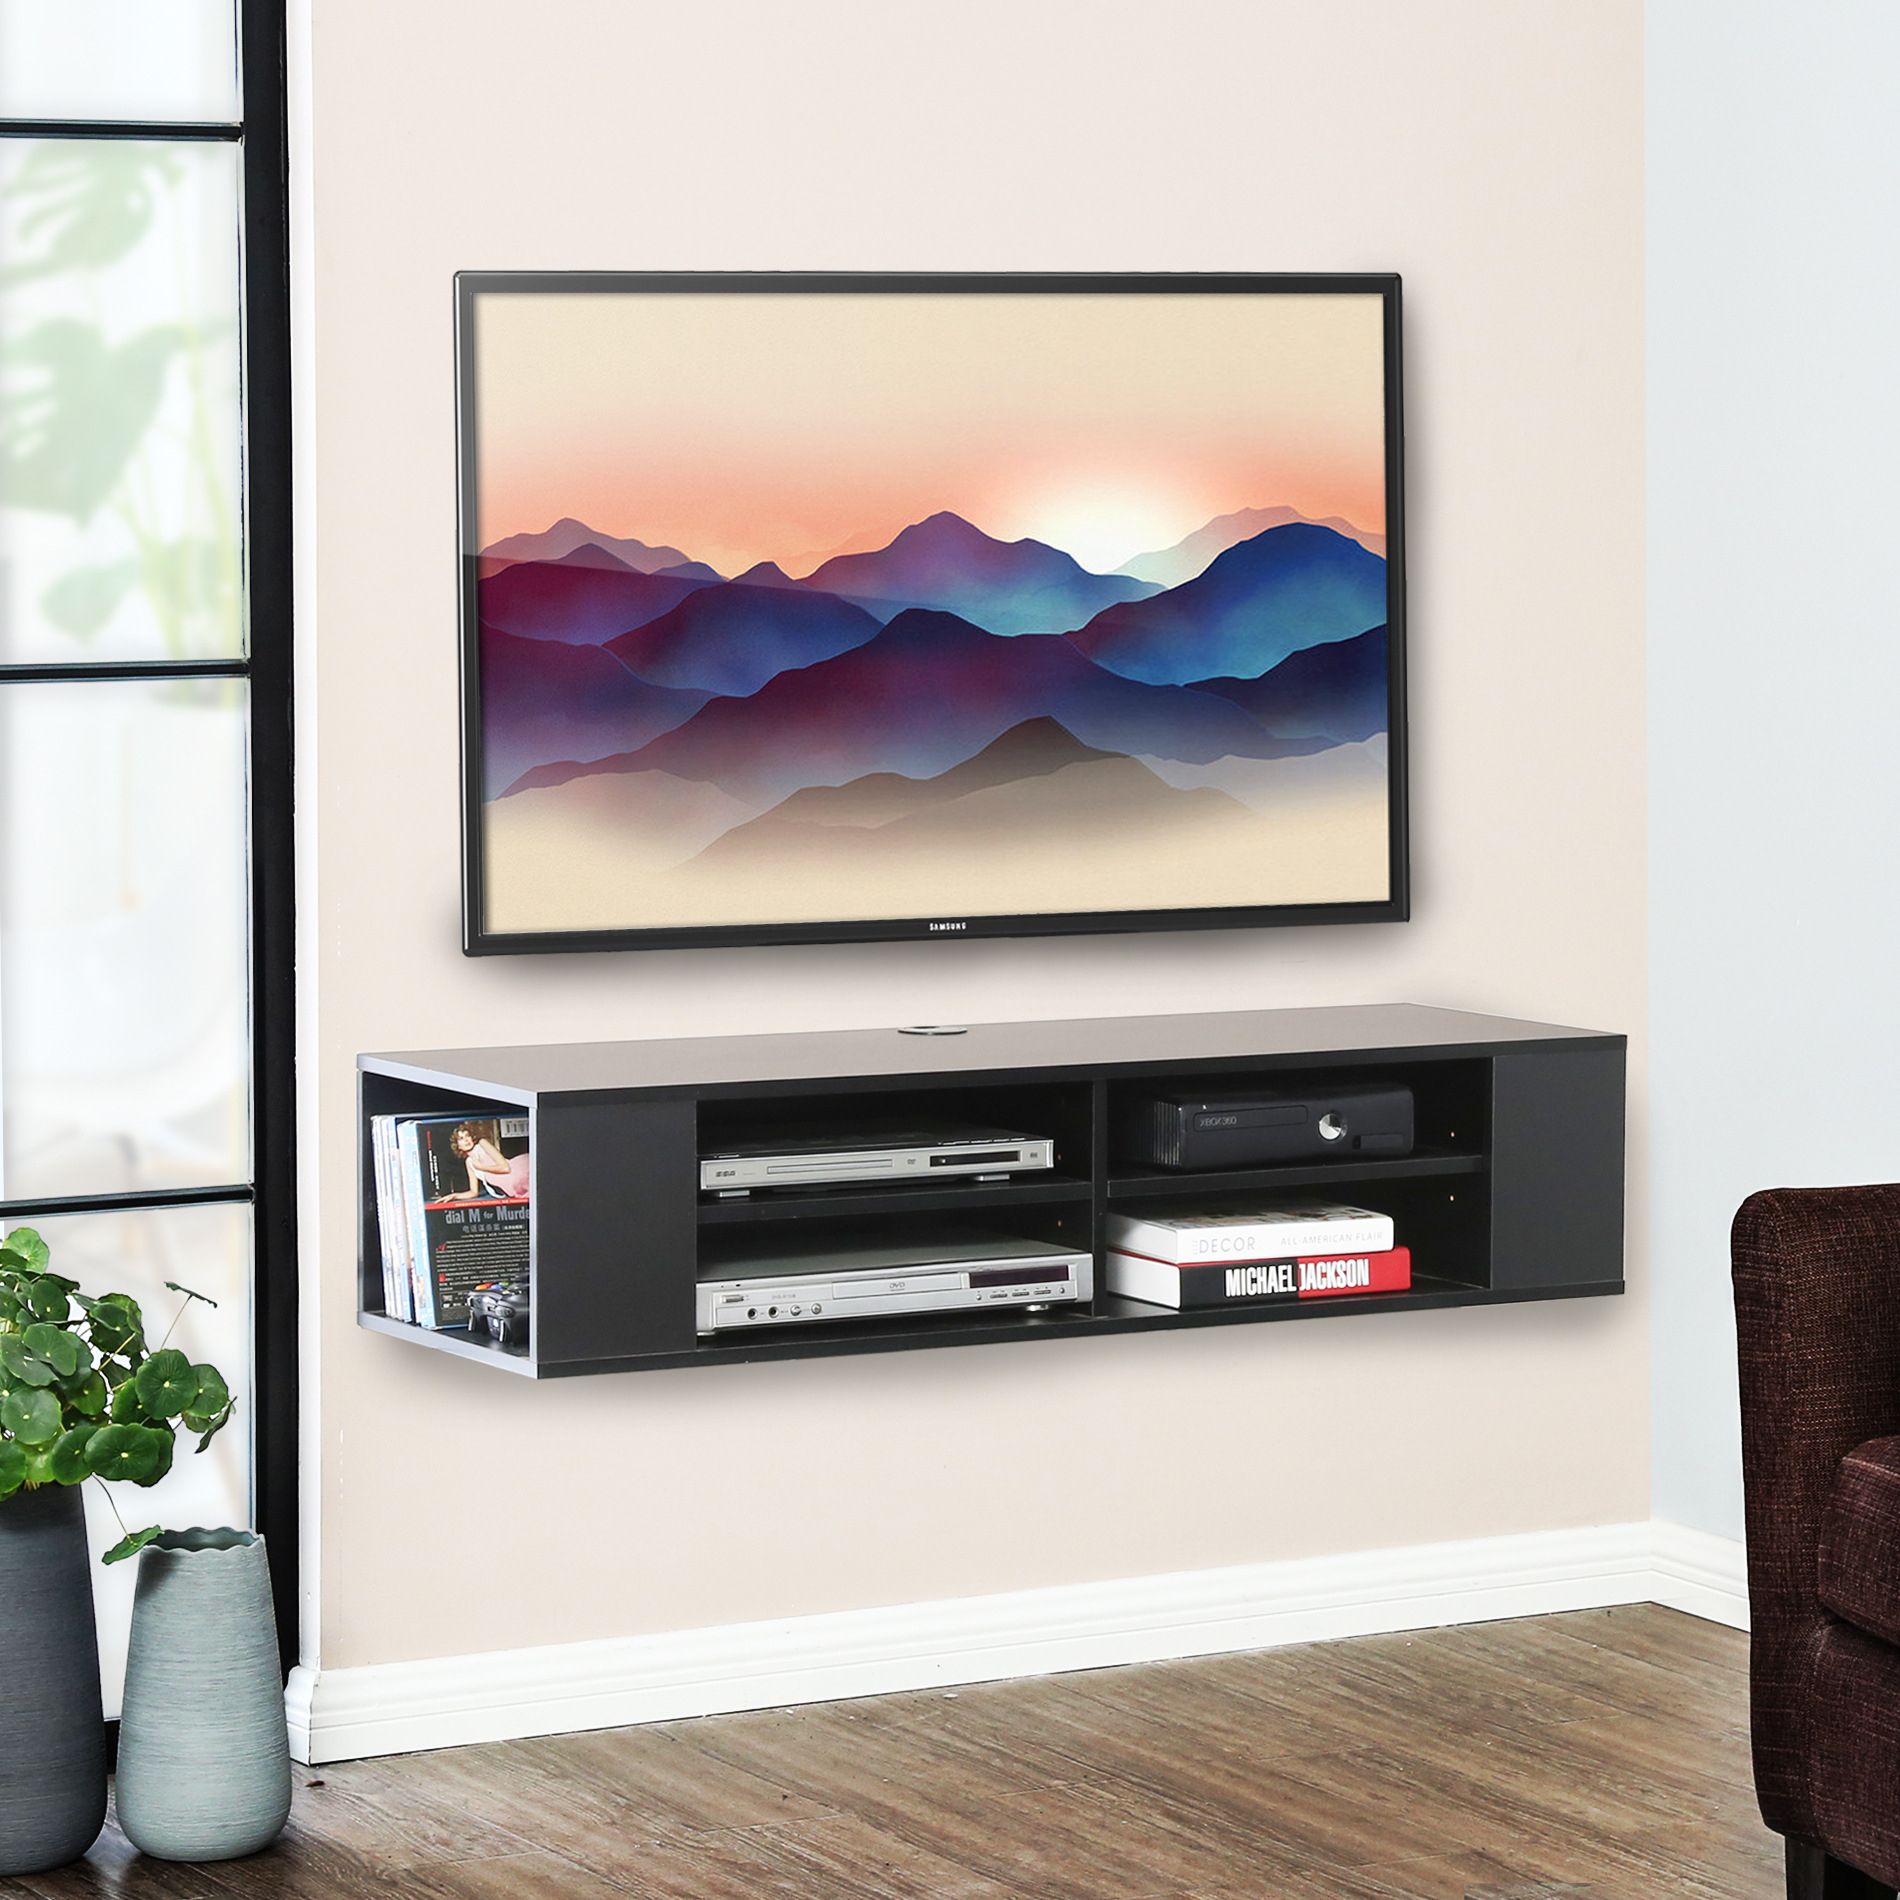 Fitueyes Black Wall Mounted Media Console Floating Tv Inside Wall Mounted Tv Racks (View 8 of 15)